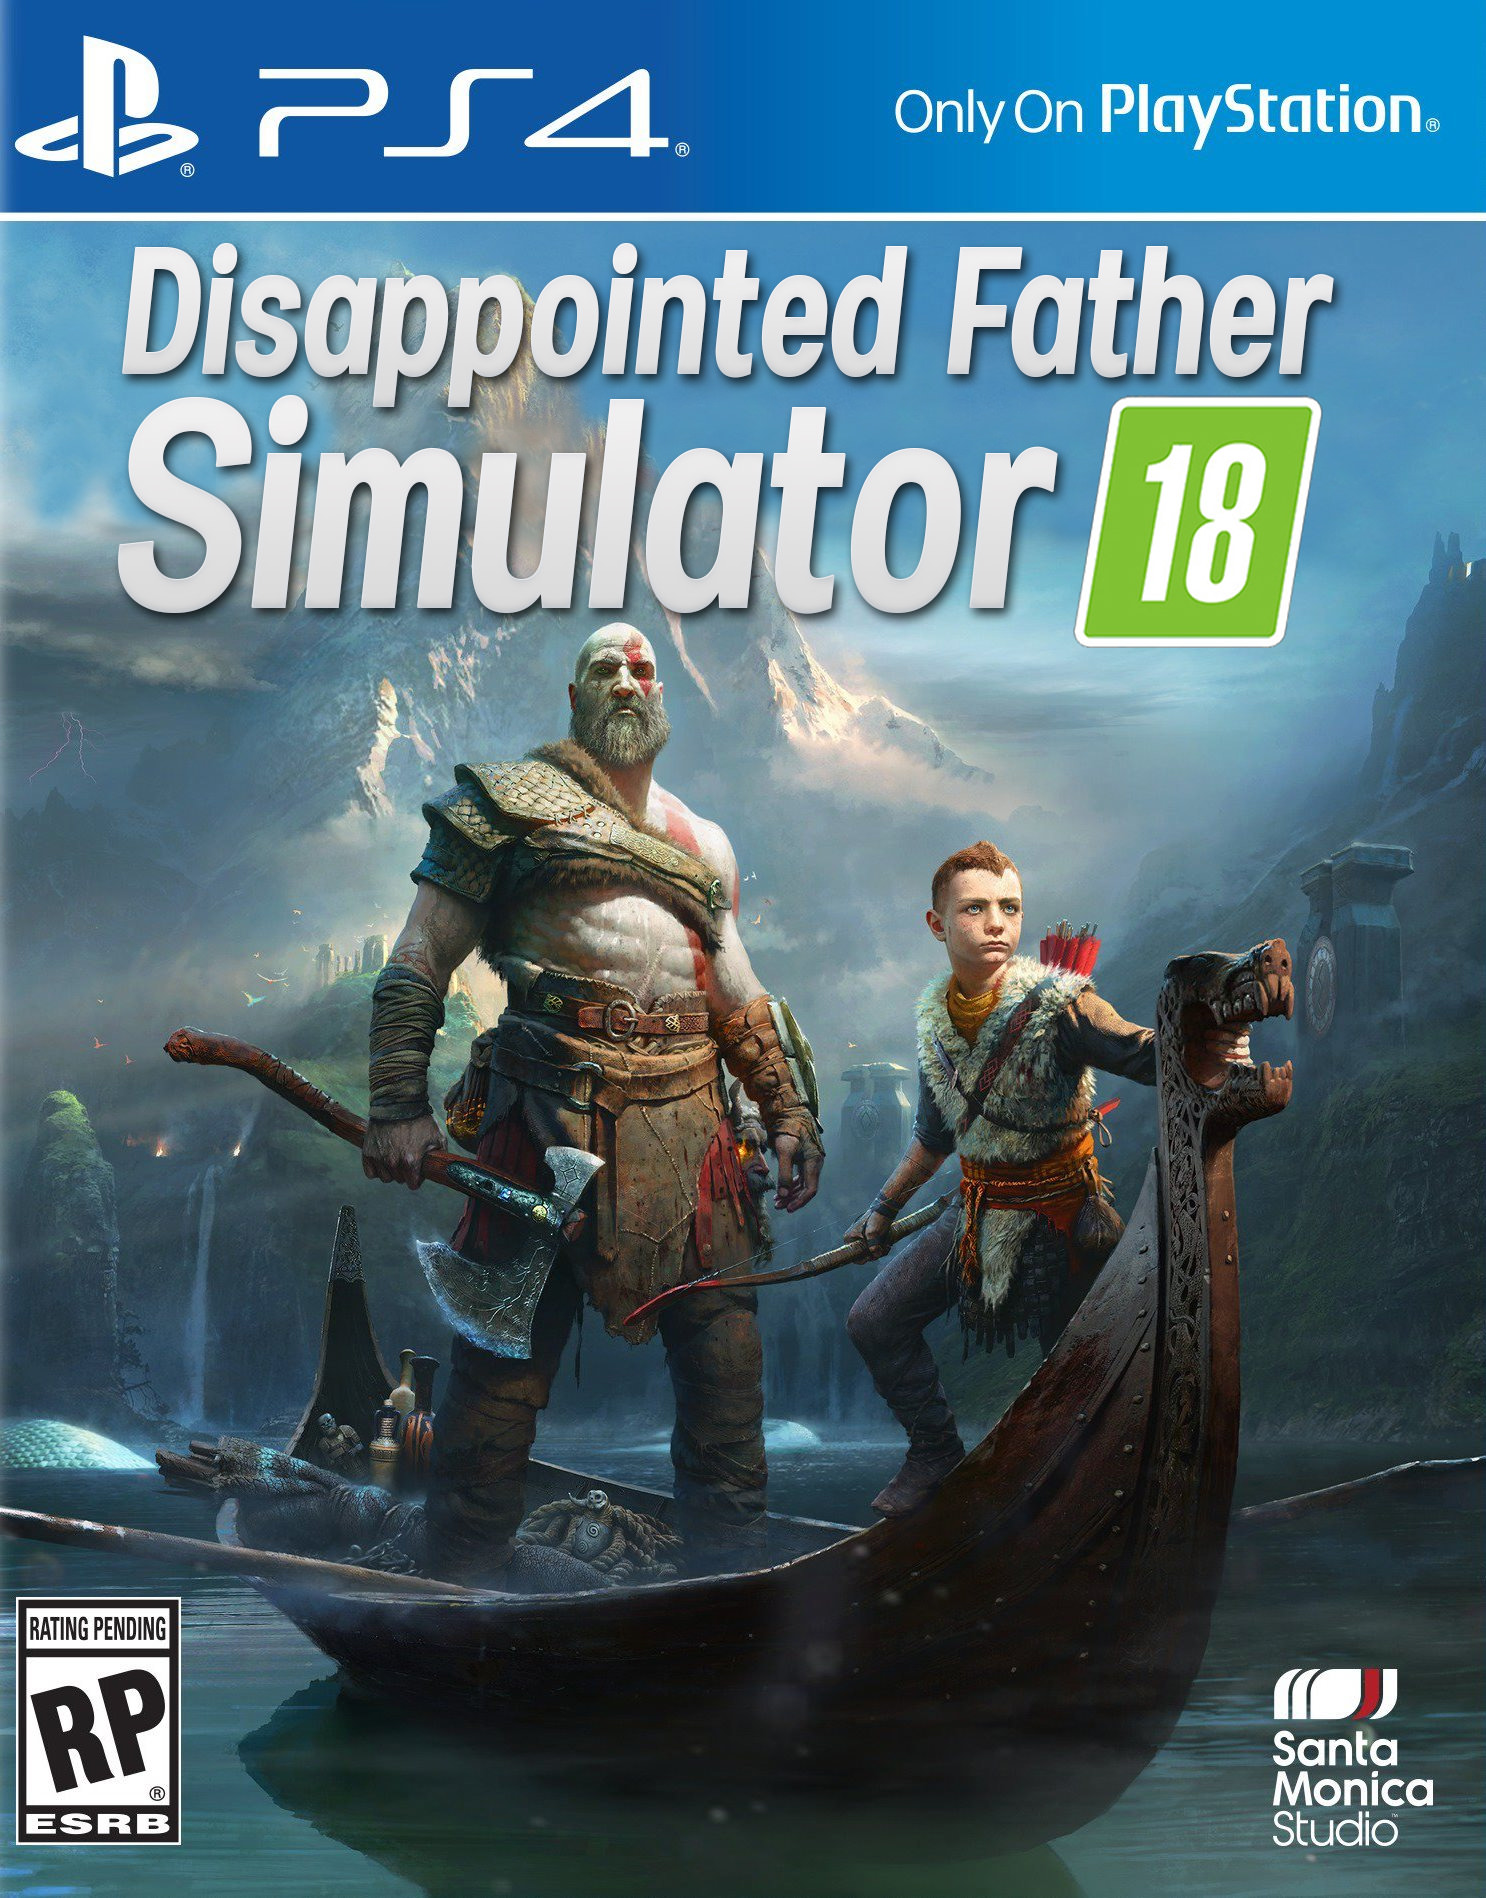 god of war memes - B. P S 4 Only on Playstation. Disappointed Father Simulator 18 Menn Santa Monica Studio